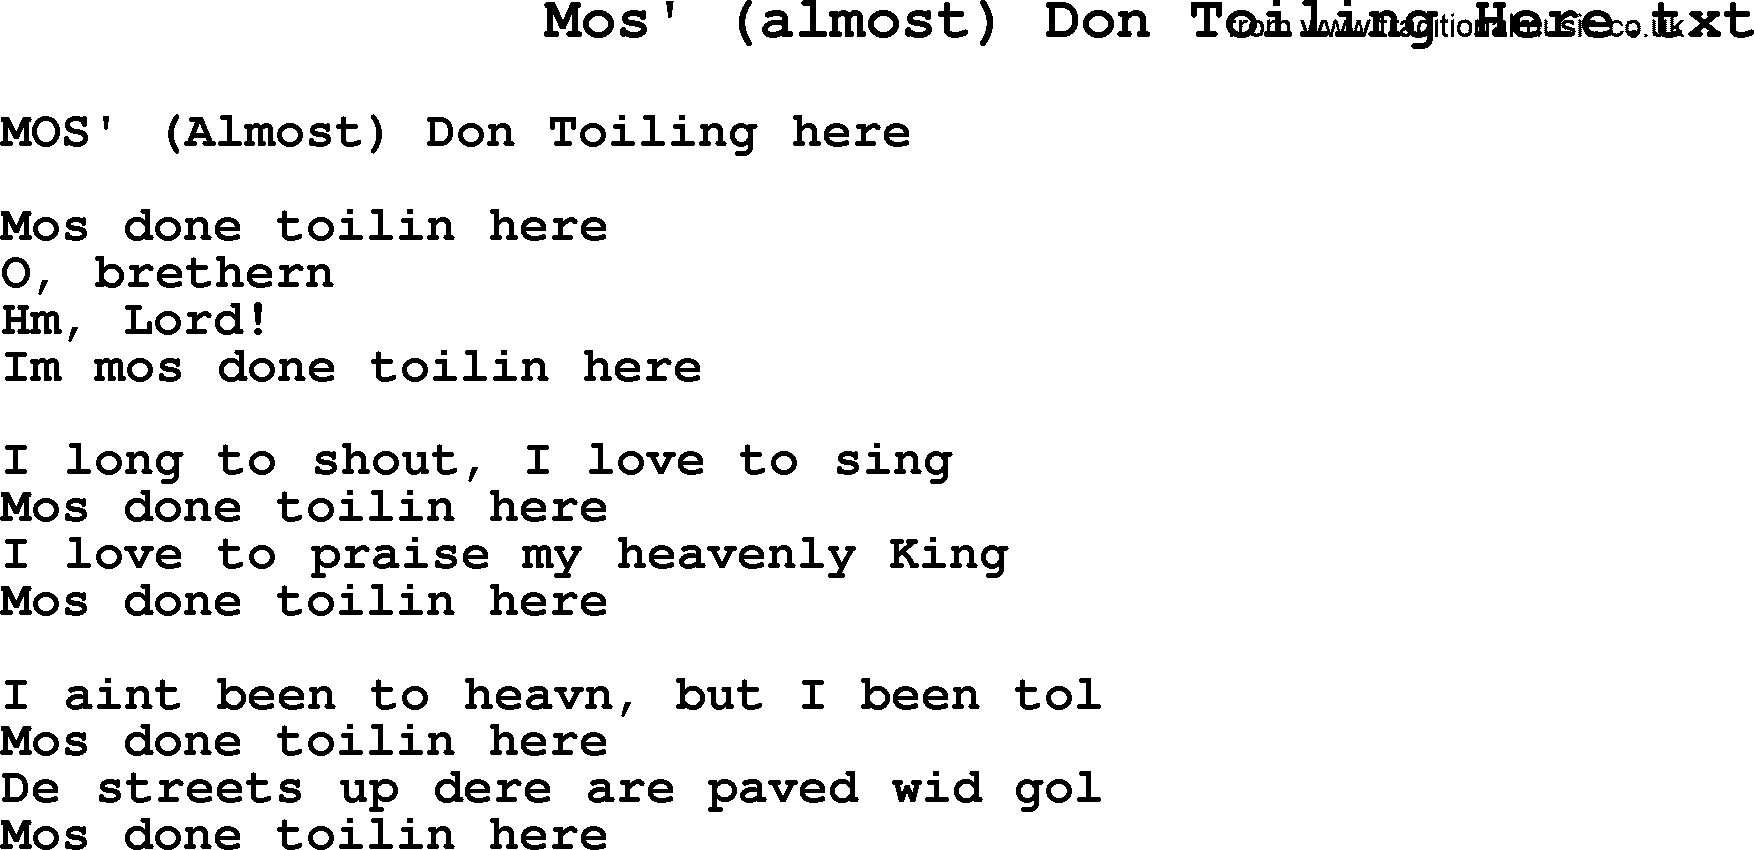 Negro Spiritual Song Lyrics for Mos' (almost) Don Toiling Here